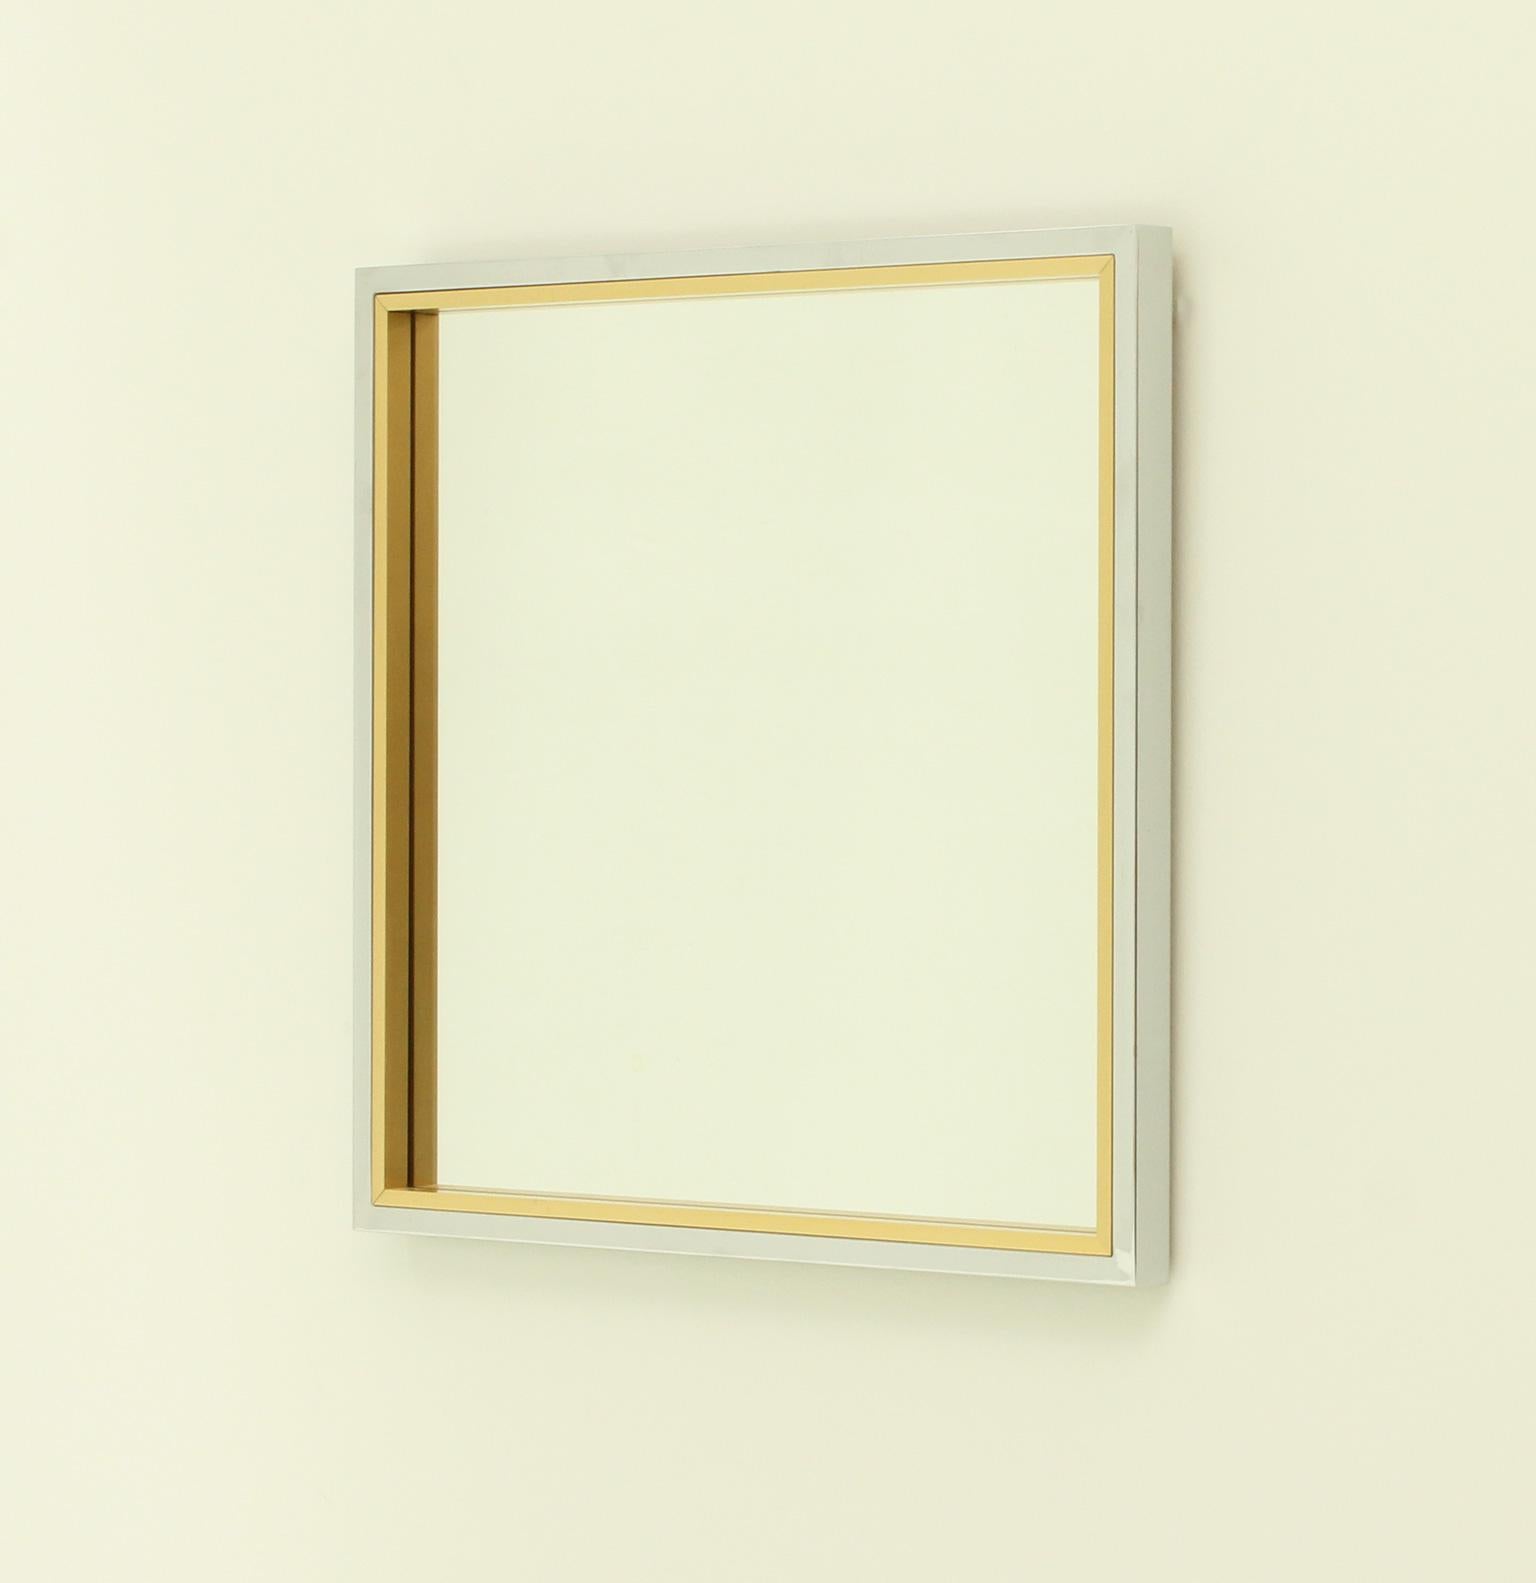 Italian square wall mirror from 1970's. Double frame in chromed metal and brass with square mirror glass.